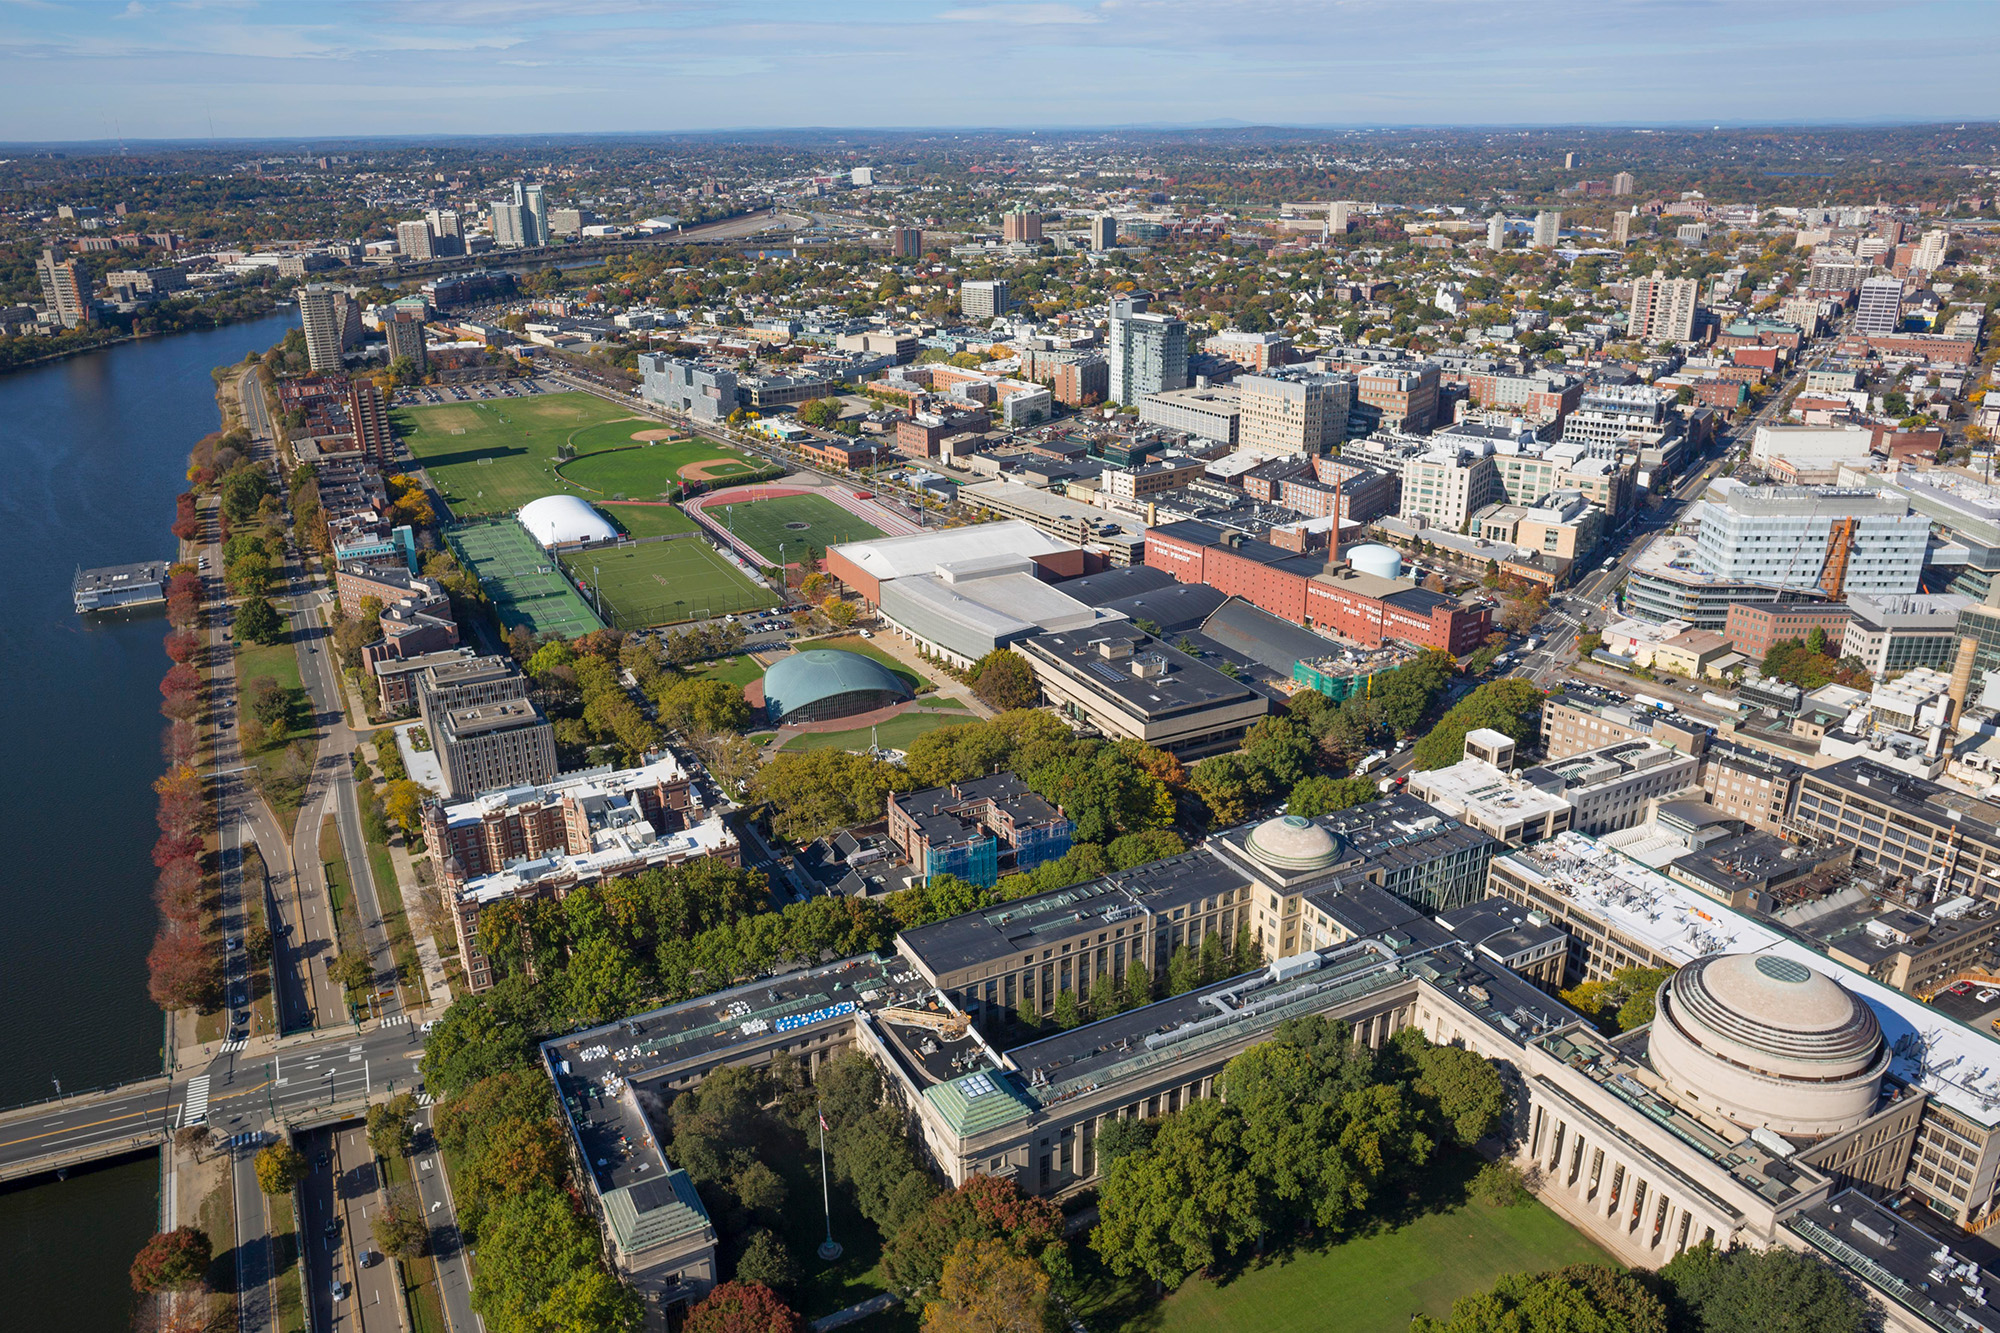 MIT Morningside Academy for Style developed as a new hub for cross-disciplinary instruction, research, and innovation | MIT News